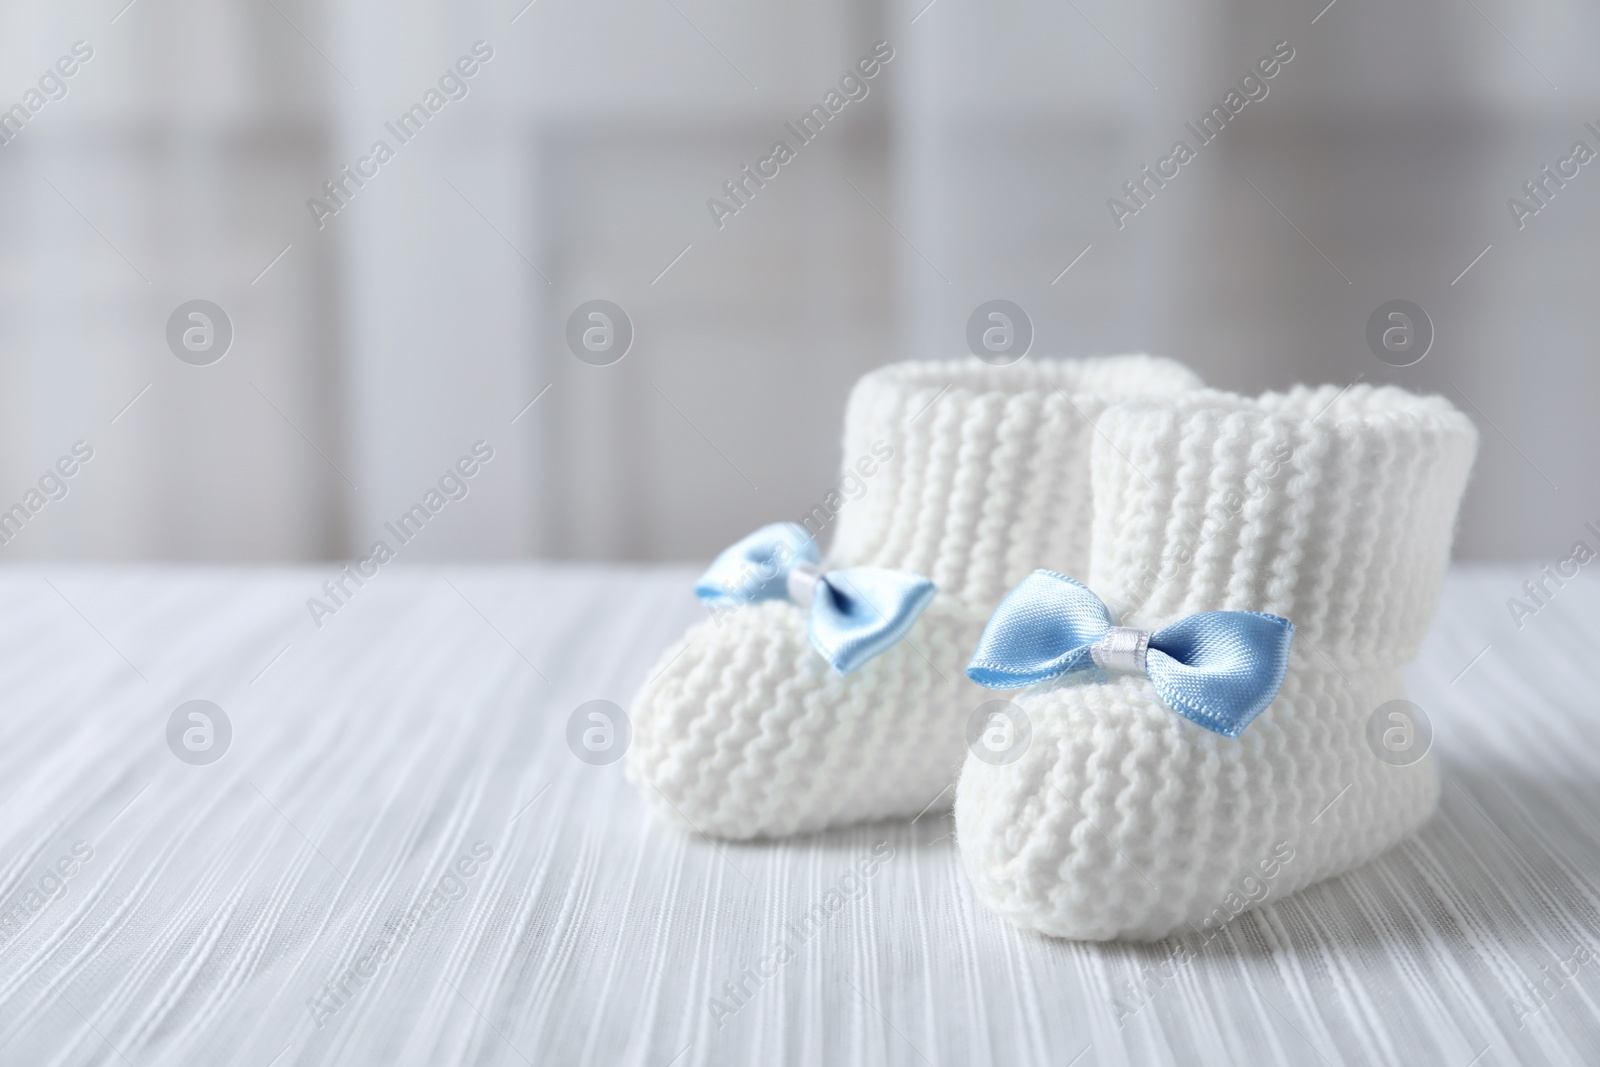 Photo of Handmade baby booties on plaid against blurred background. Space for text